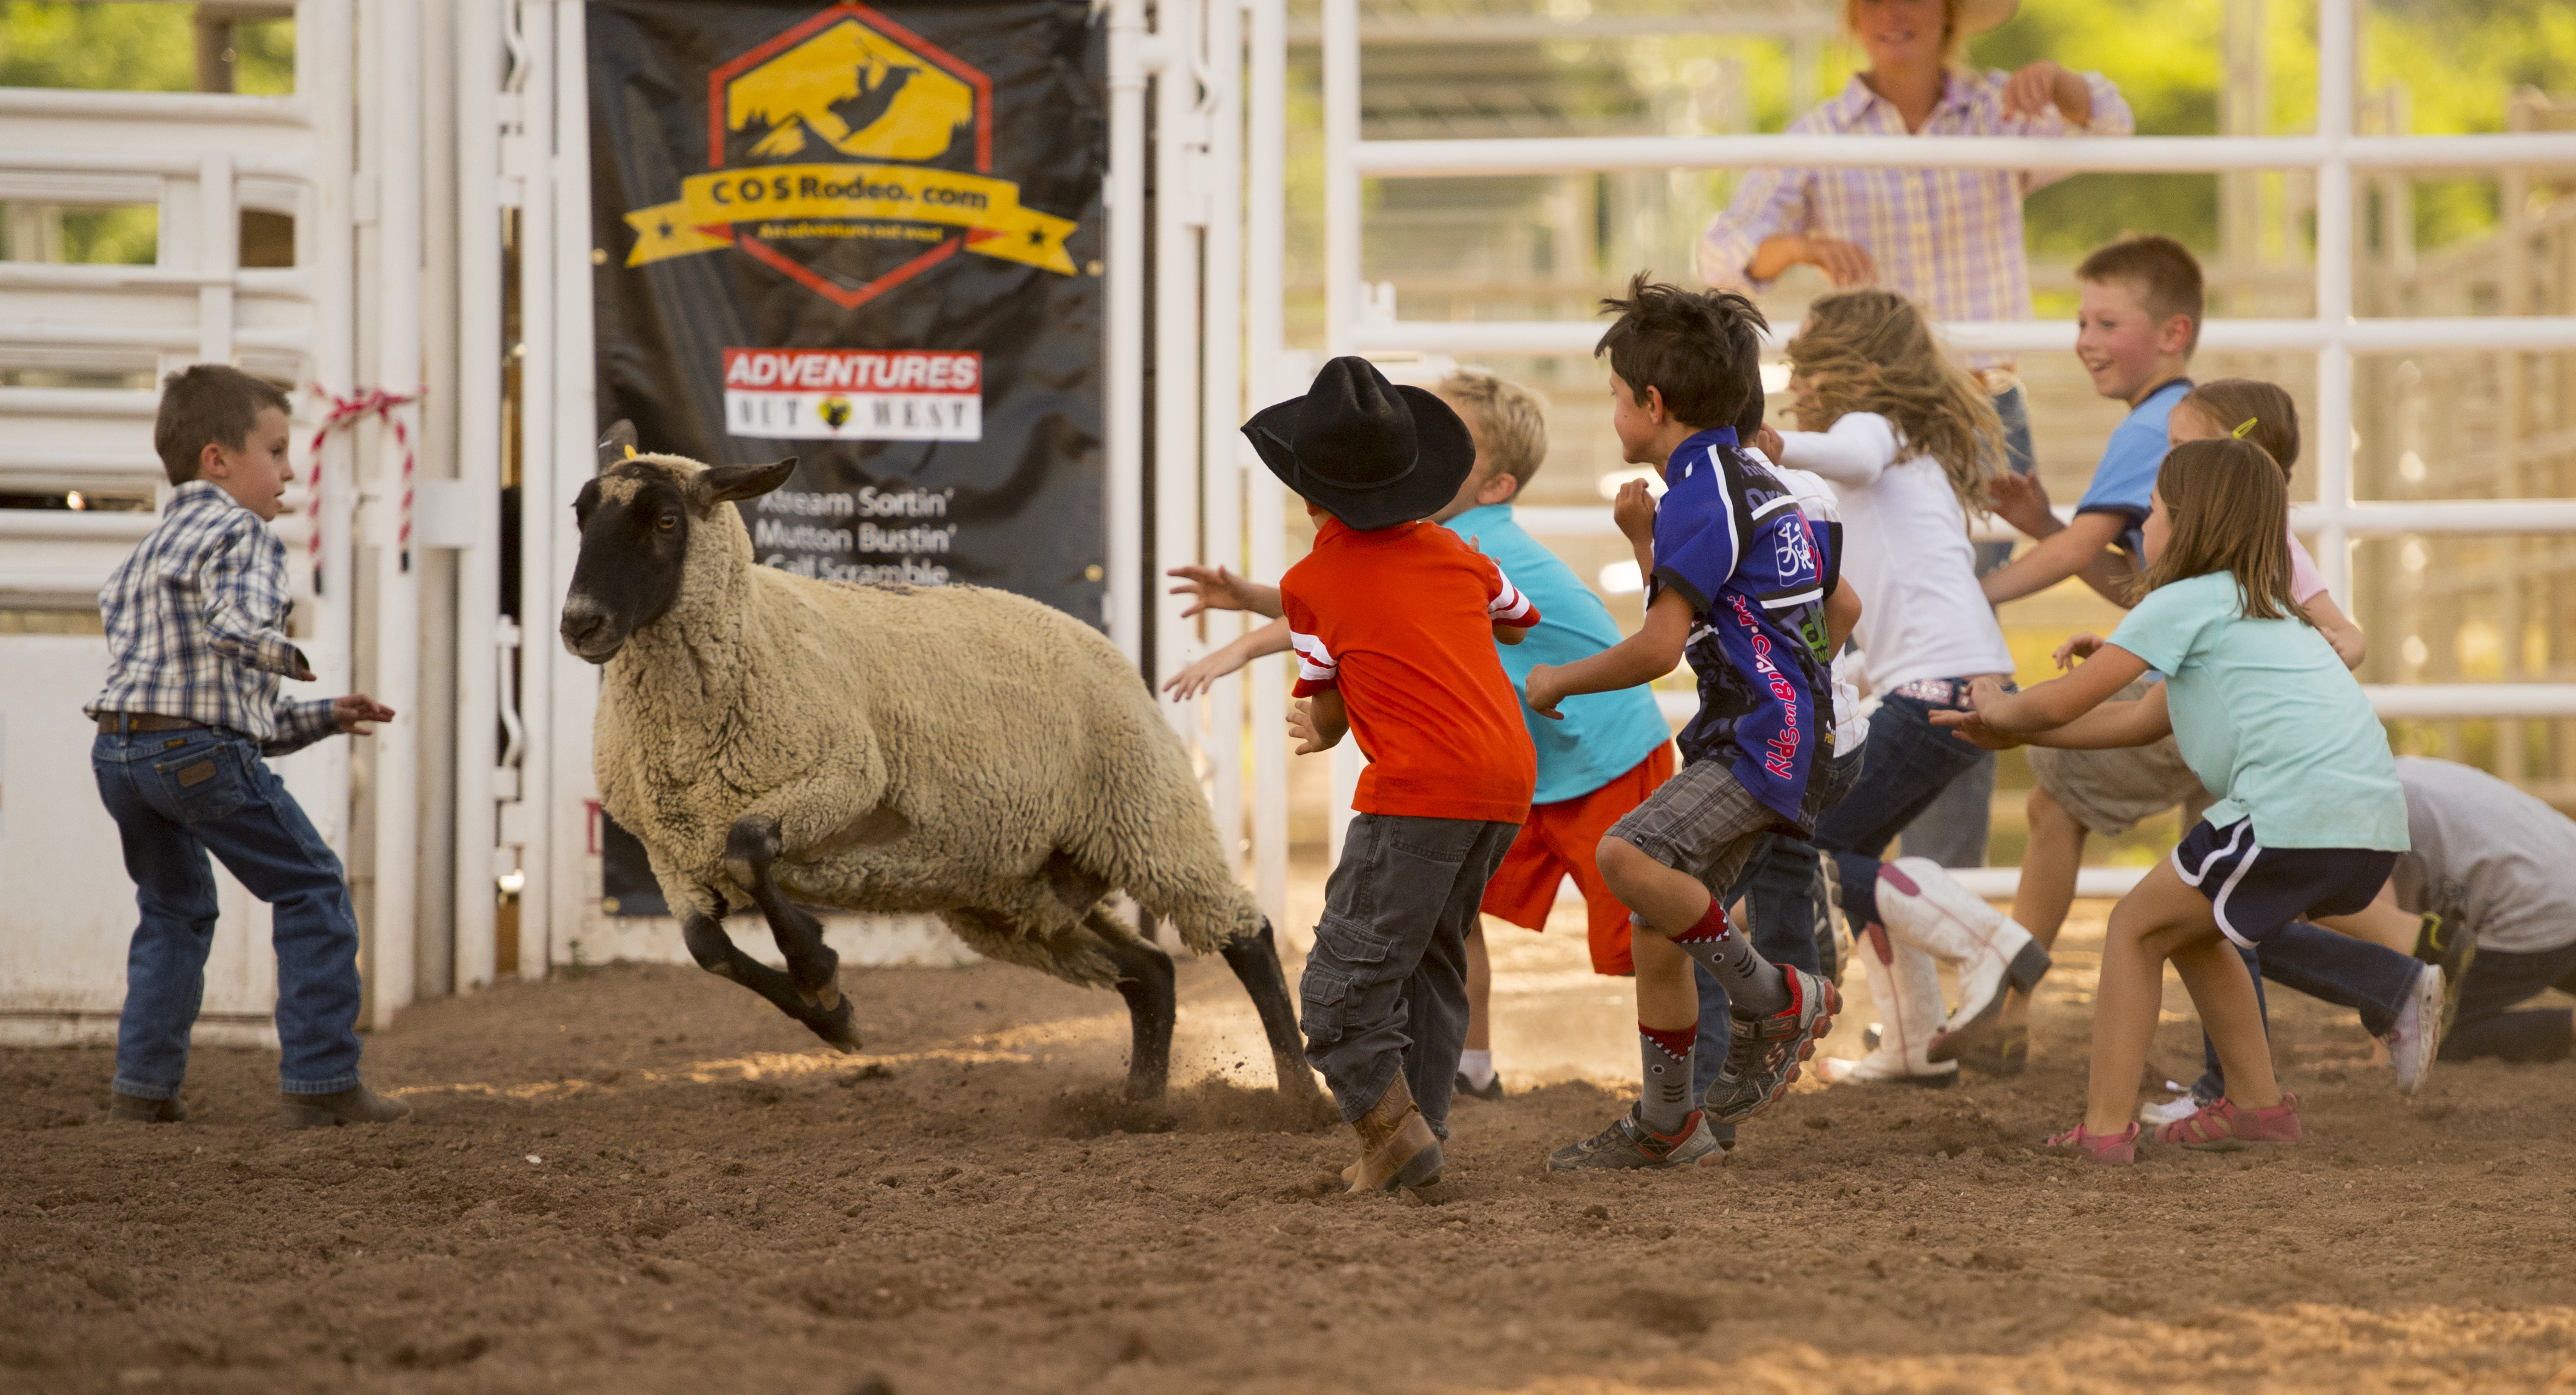 Kids chase a loose sheep during a "Mutton Scramble" at the fourth COS Rodeo of the summer Wednesday, July 6, 2016 at the Norris-Penrose Event Center. The event resumes for four consecutive Wednesday nights at 5pm beginning July 27th. Tickets art $34 and include dinner, rodeo and a concert. Visitors can even participate in certain selected events. Photo by Mark Reis, The Gazette